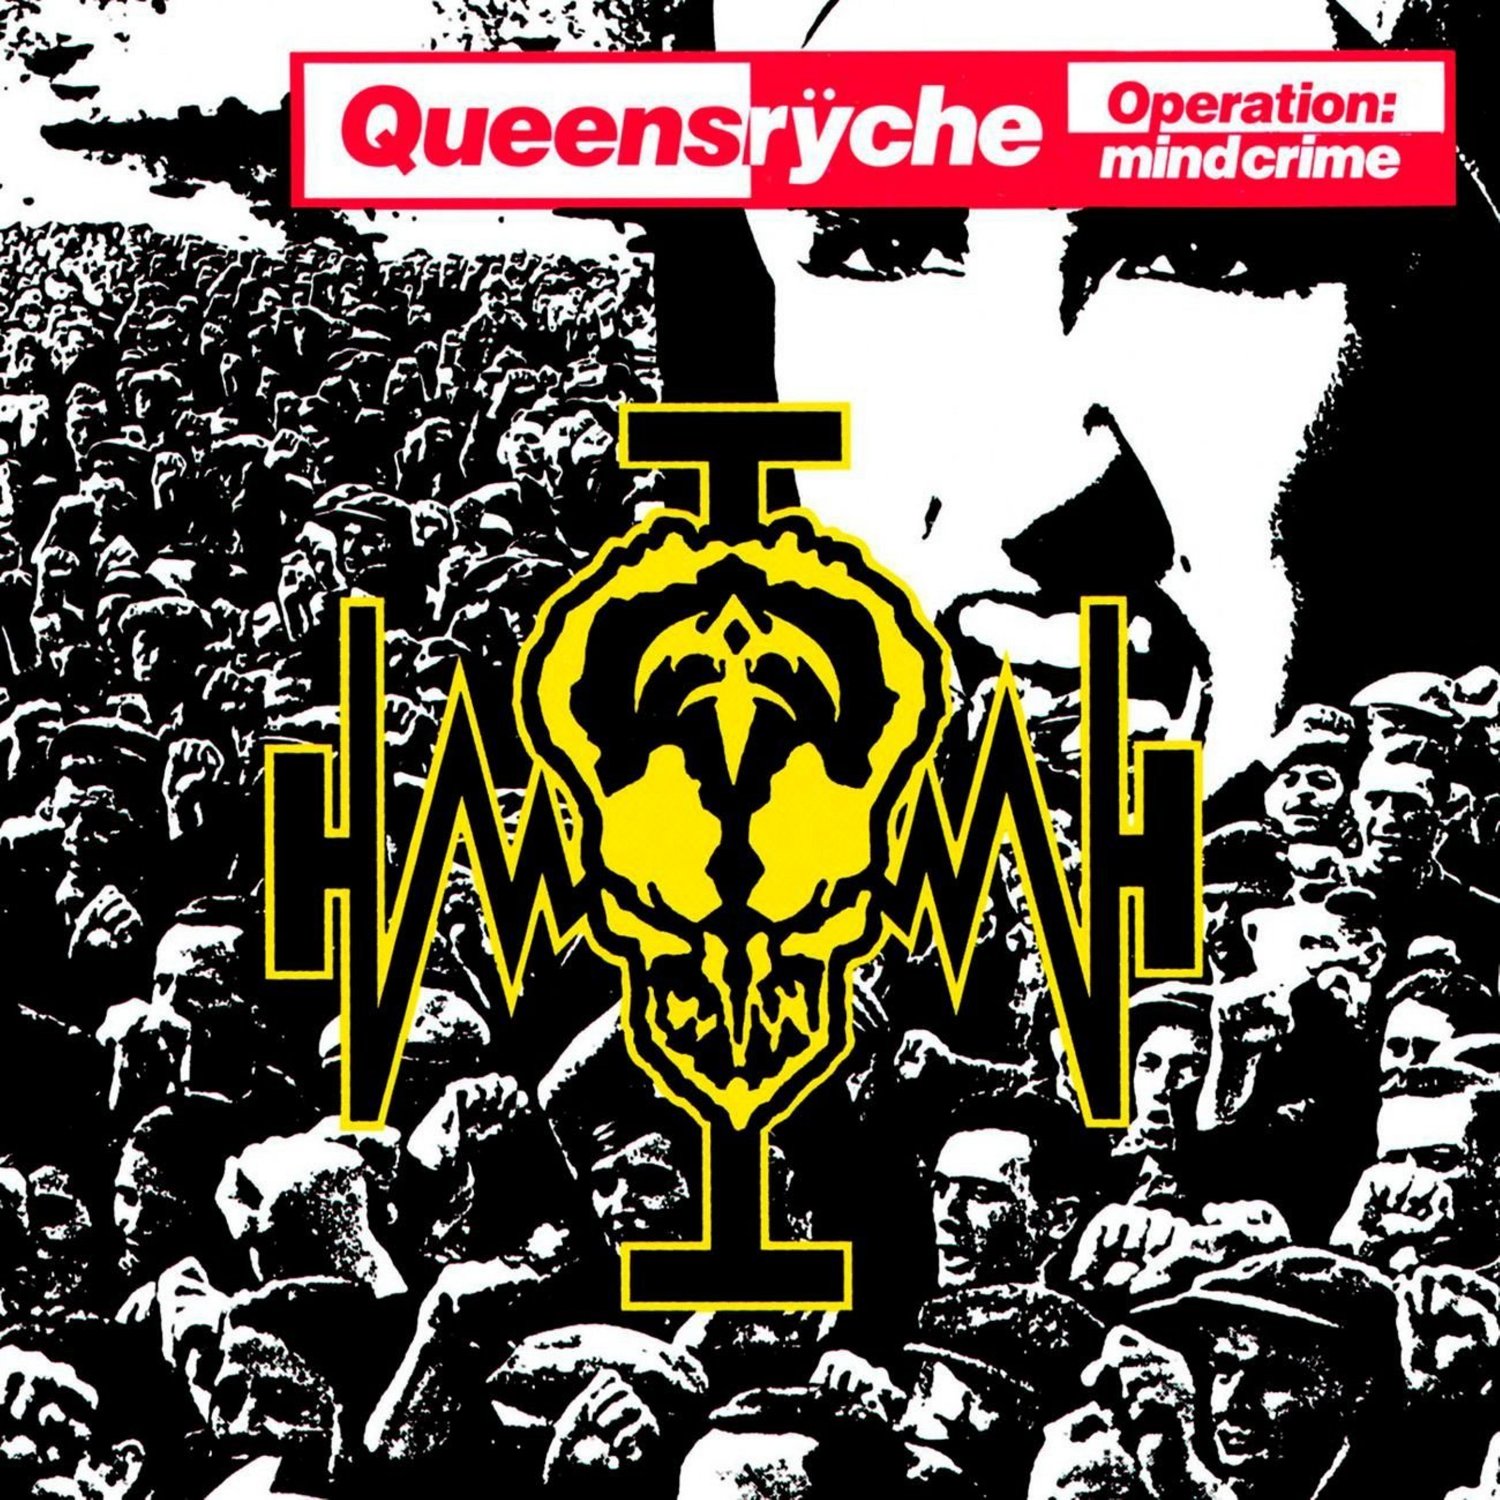 QUEENSRYCHE Operation Mindcrime BANNER Huge 4X4 Ft Fabric Poster Tapestry Flag Print album cover art